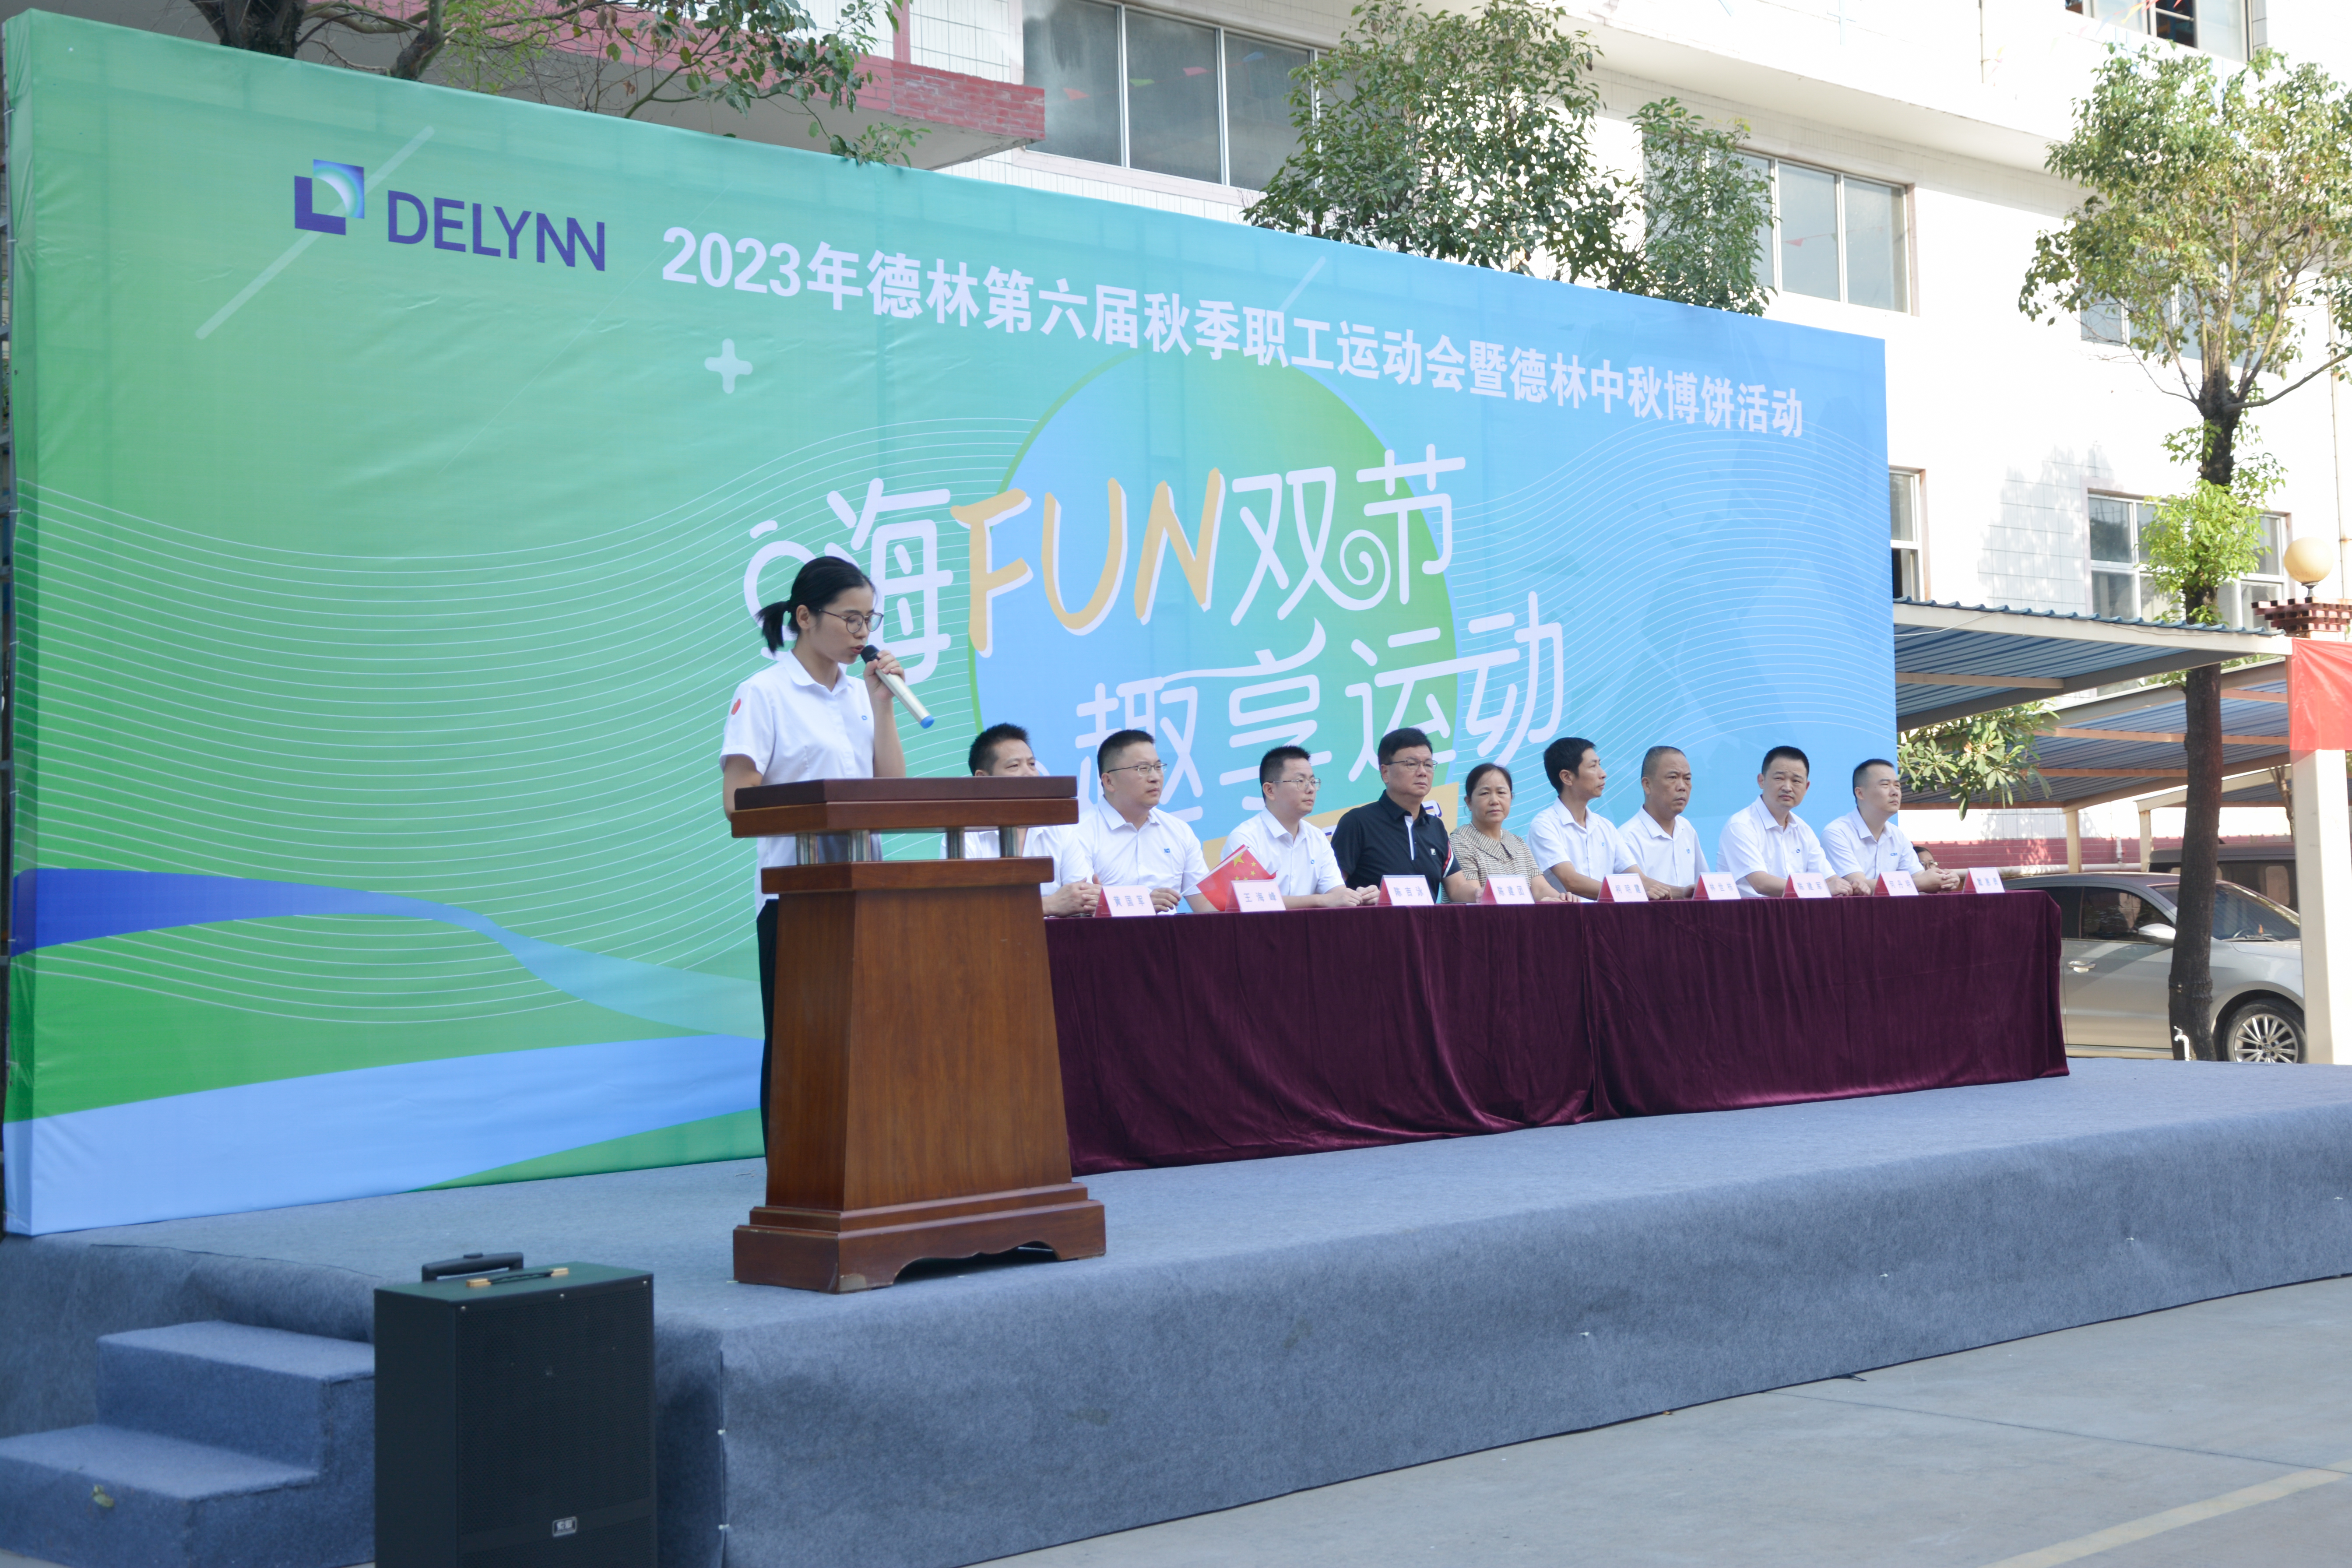 Delin Information | The 6th Delin Staff Sports Meeting and Mid-Autumn Festival activities concluded successfully